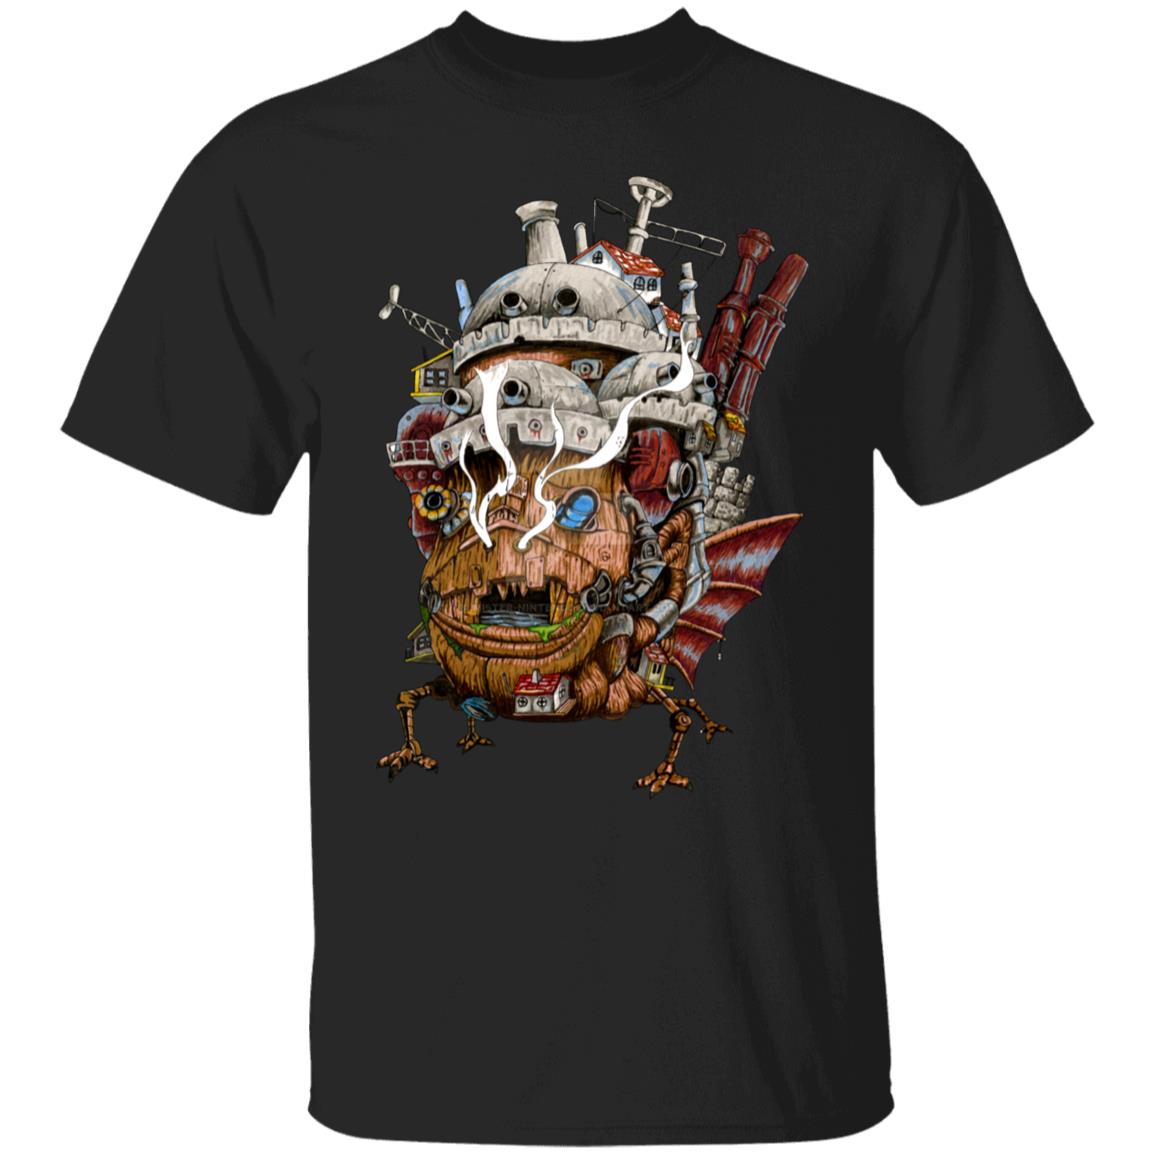 Howl’s Moving Castle – Smoking T Shirt